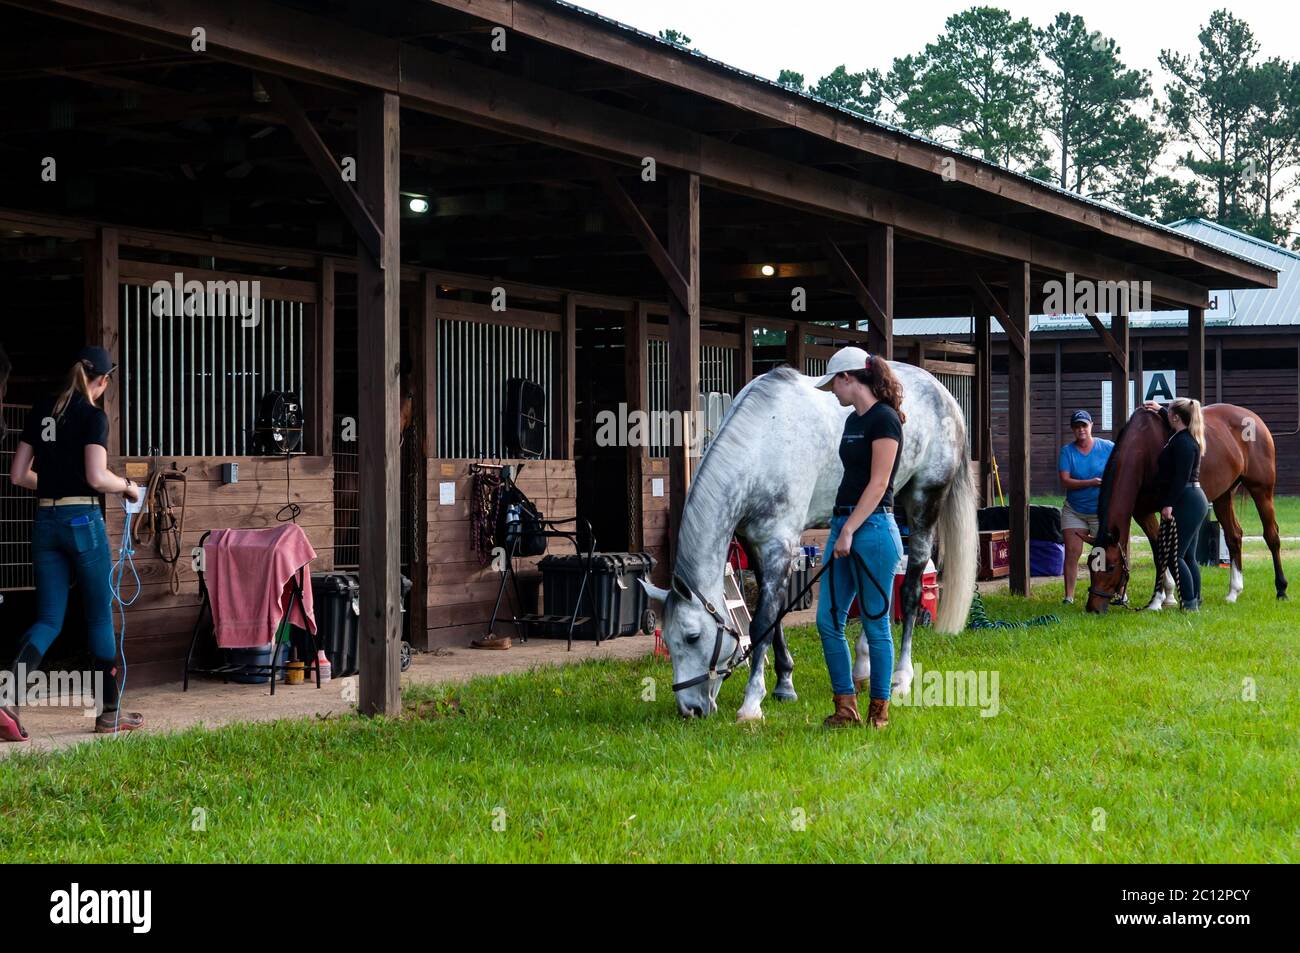 Raeford, North Carolina, USA. 13th June, 2020. June 13, 2020 - Raeford, North Carolina, USA - JORDAN ANDERSON of Mocksville, N.C. leads Mo for a morning walk at the 2020 War Horse Event Series, June 13 at Carolina Horse Park in Raeford, N.C. This was the first competition at the park since the COVID-19 pandemic. Founded in 2013 as the Cabin Branch Event Series, the War Horse Event Series consists of five horse trials and combined tests and attracts riders and their horses from across the eastern United States. Credit: Timothy L. Hale/ZUMA Wire/Alamy Live News Stock Photo